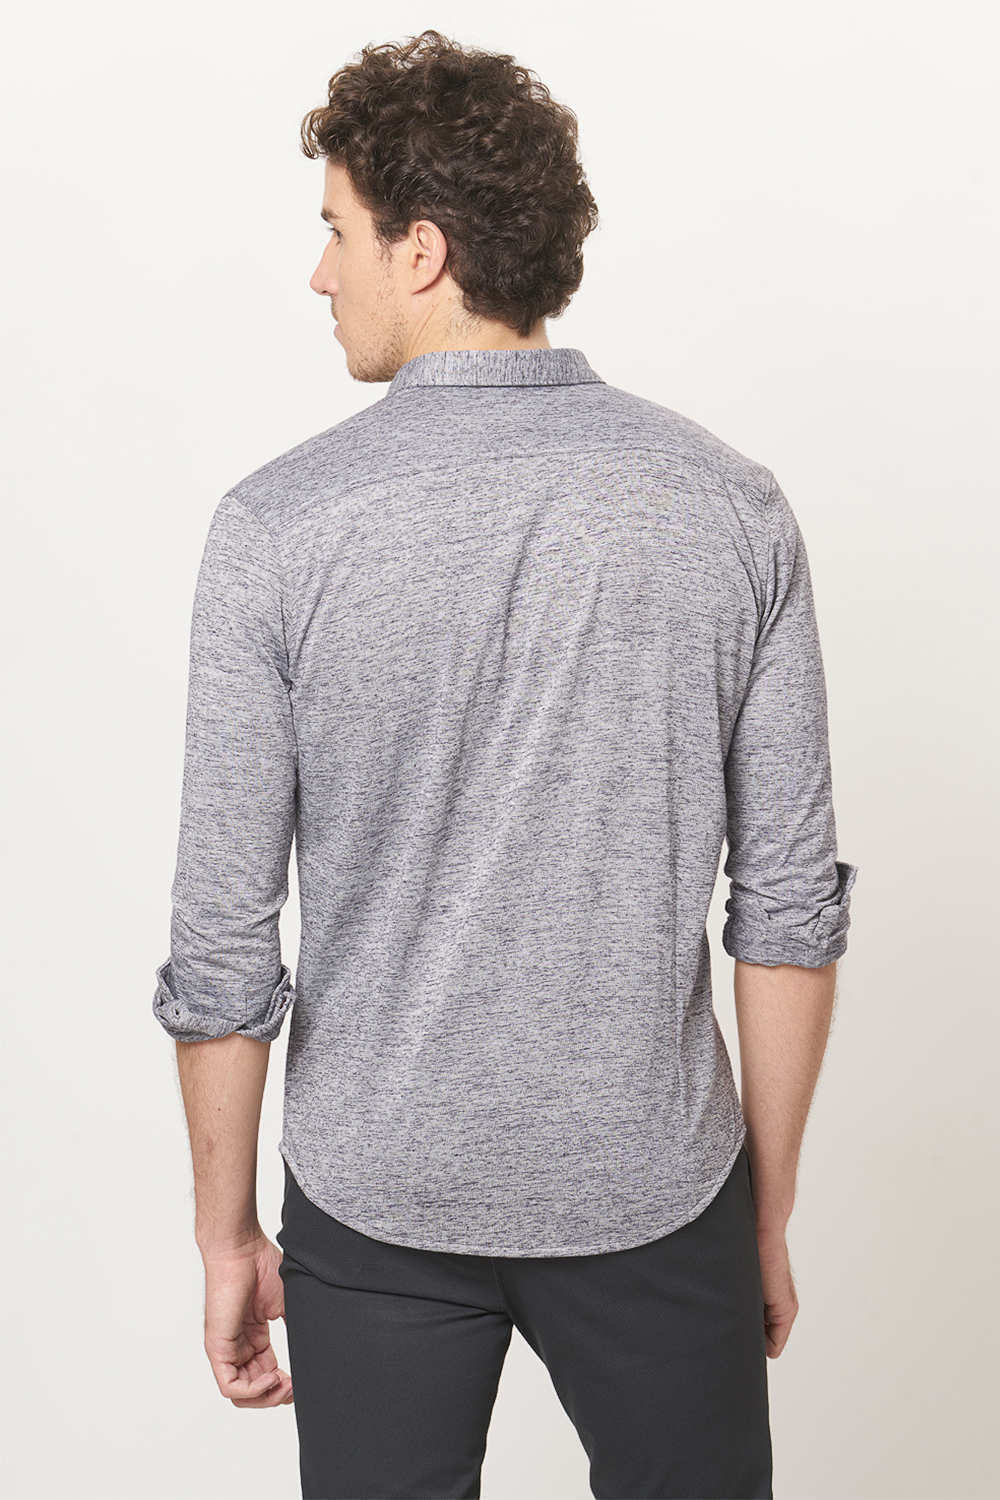 BASICS MUSCLE FIT LONG SLEEVE KNITTED SHIRT